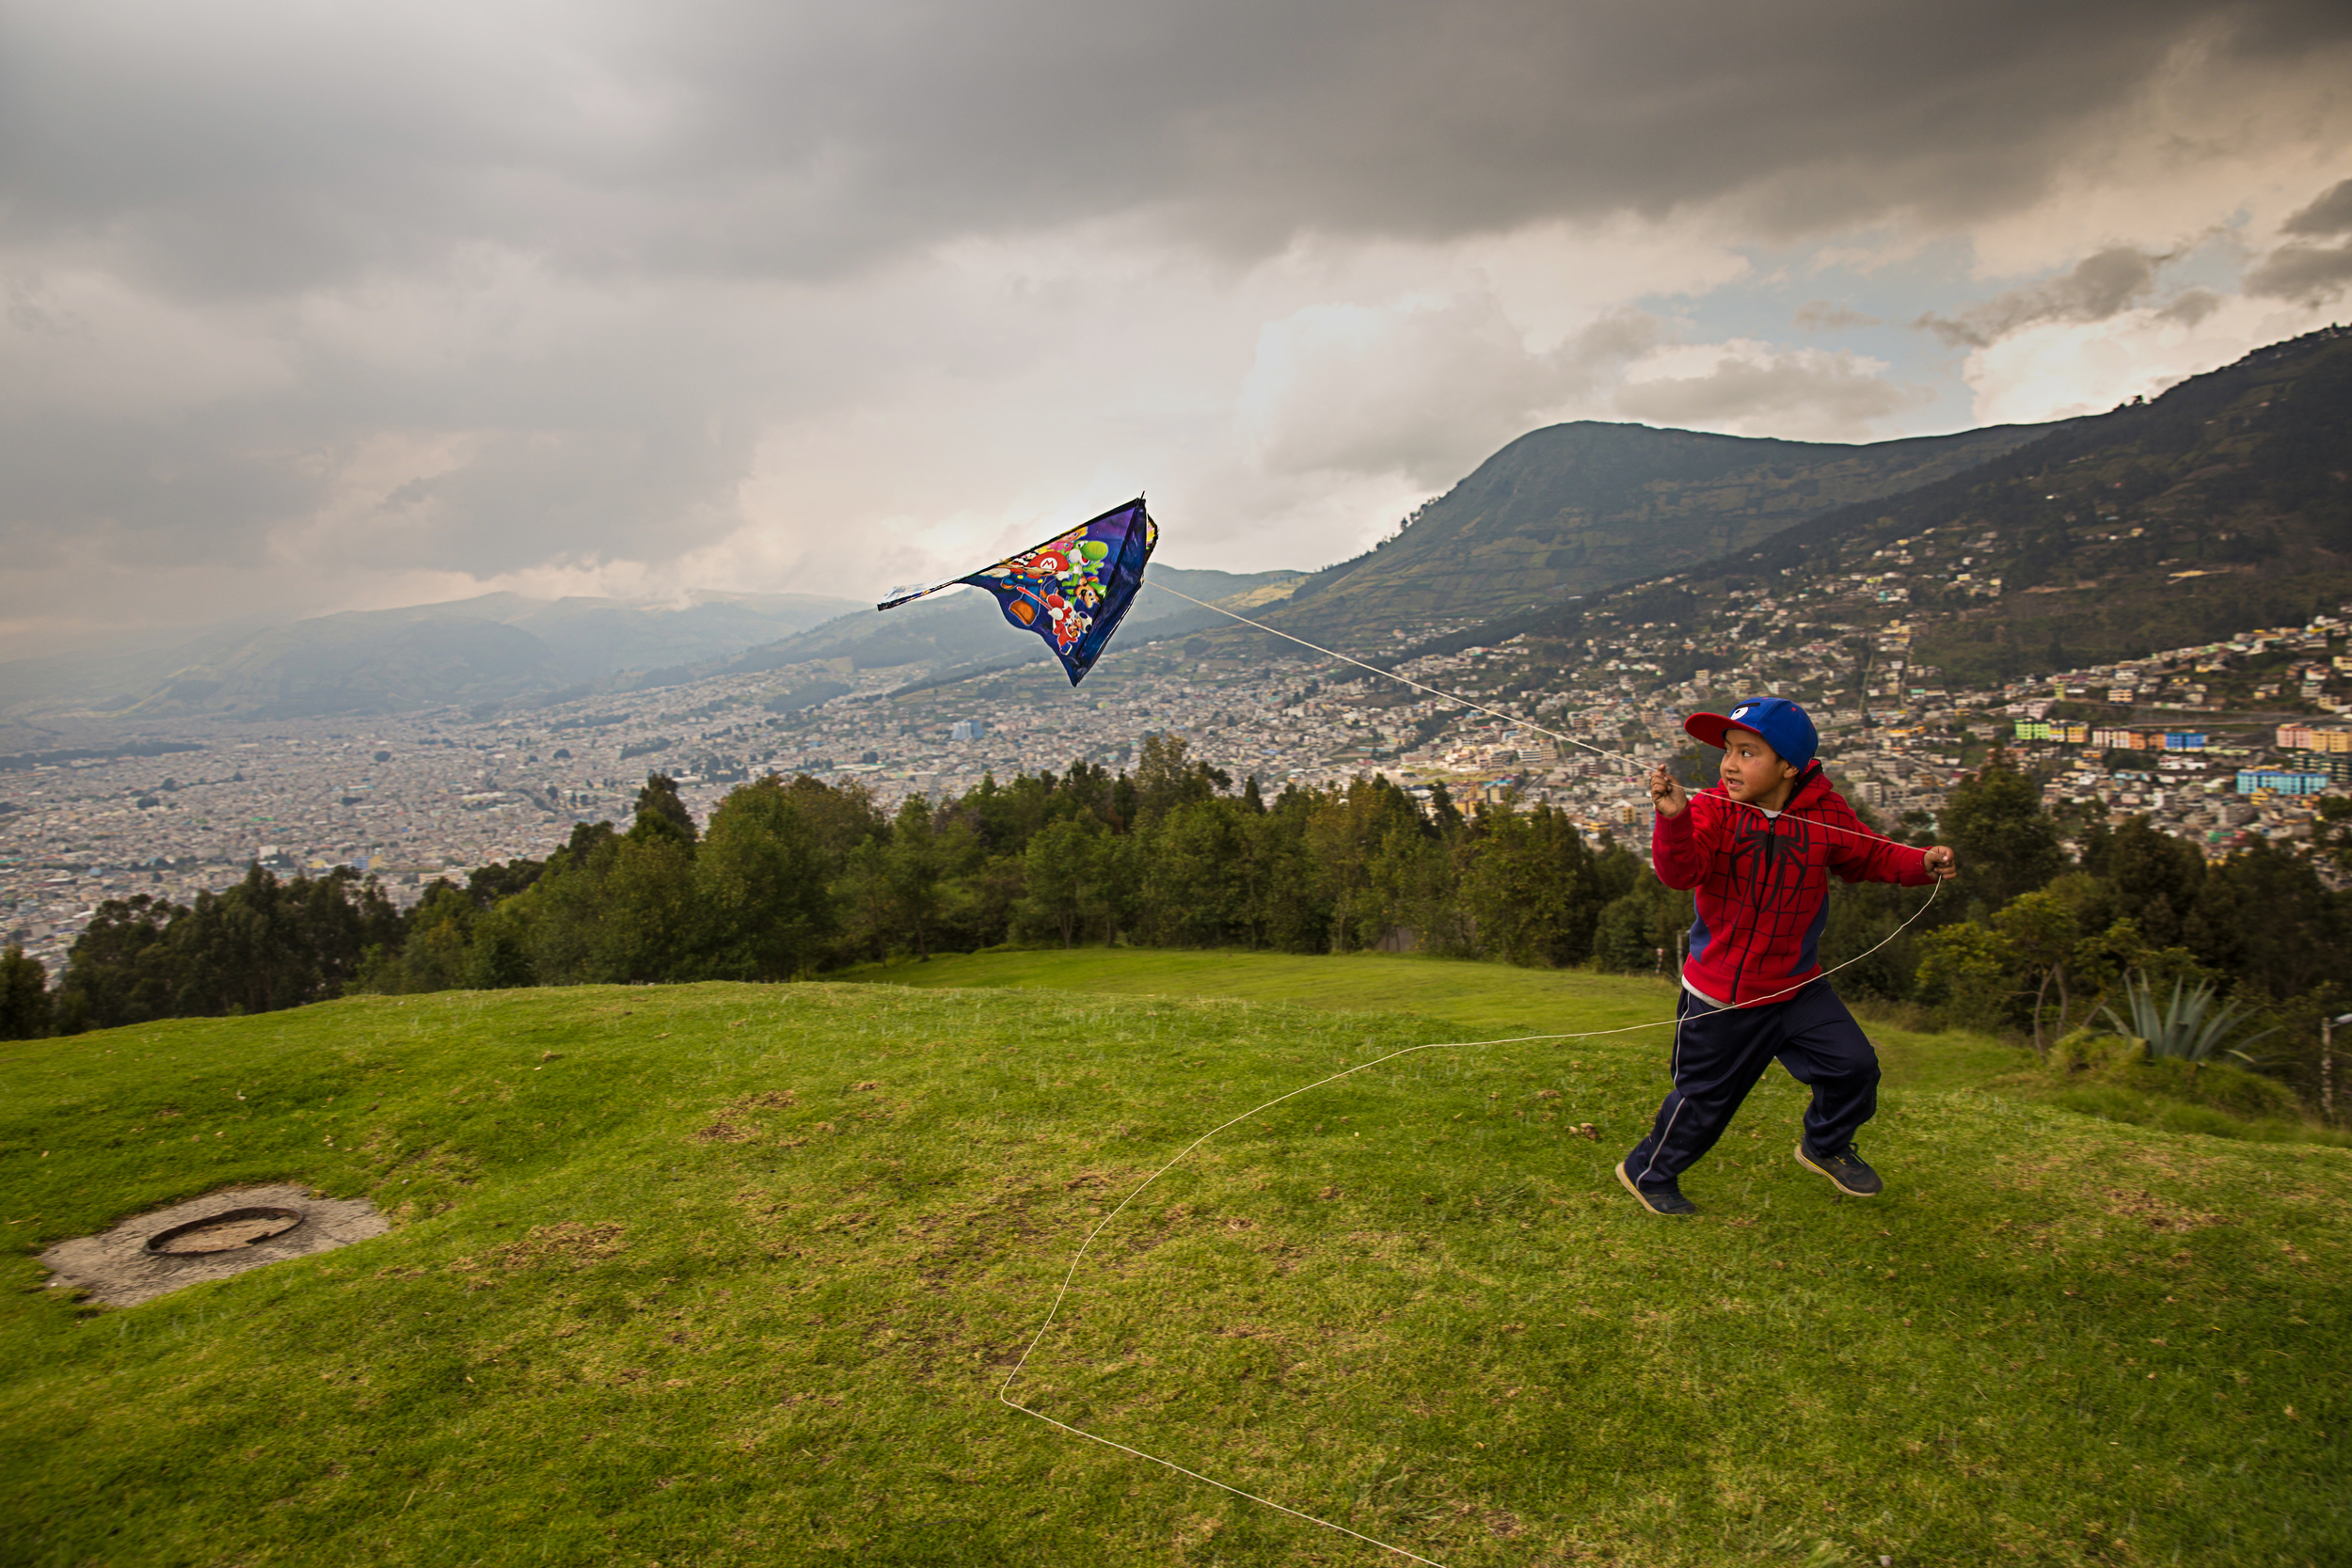  Flying a kite in the mountains of Quito, Ecuador. 